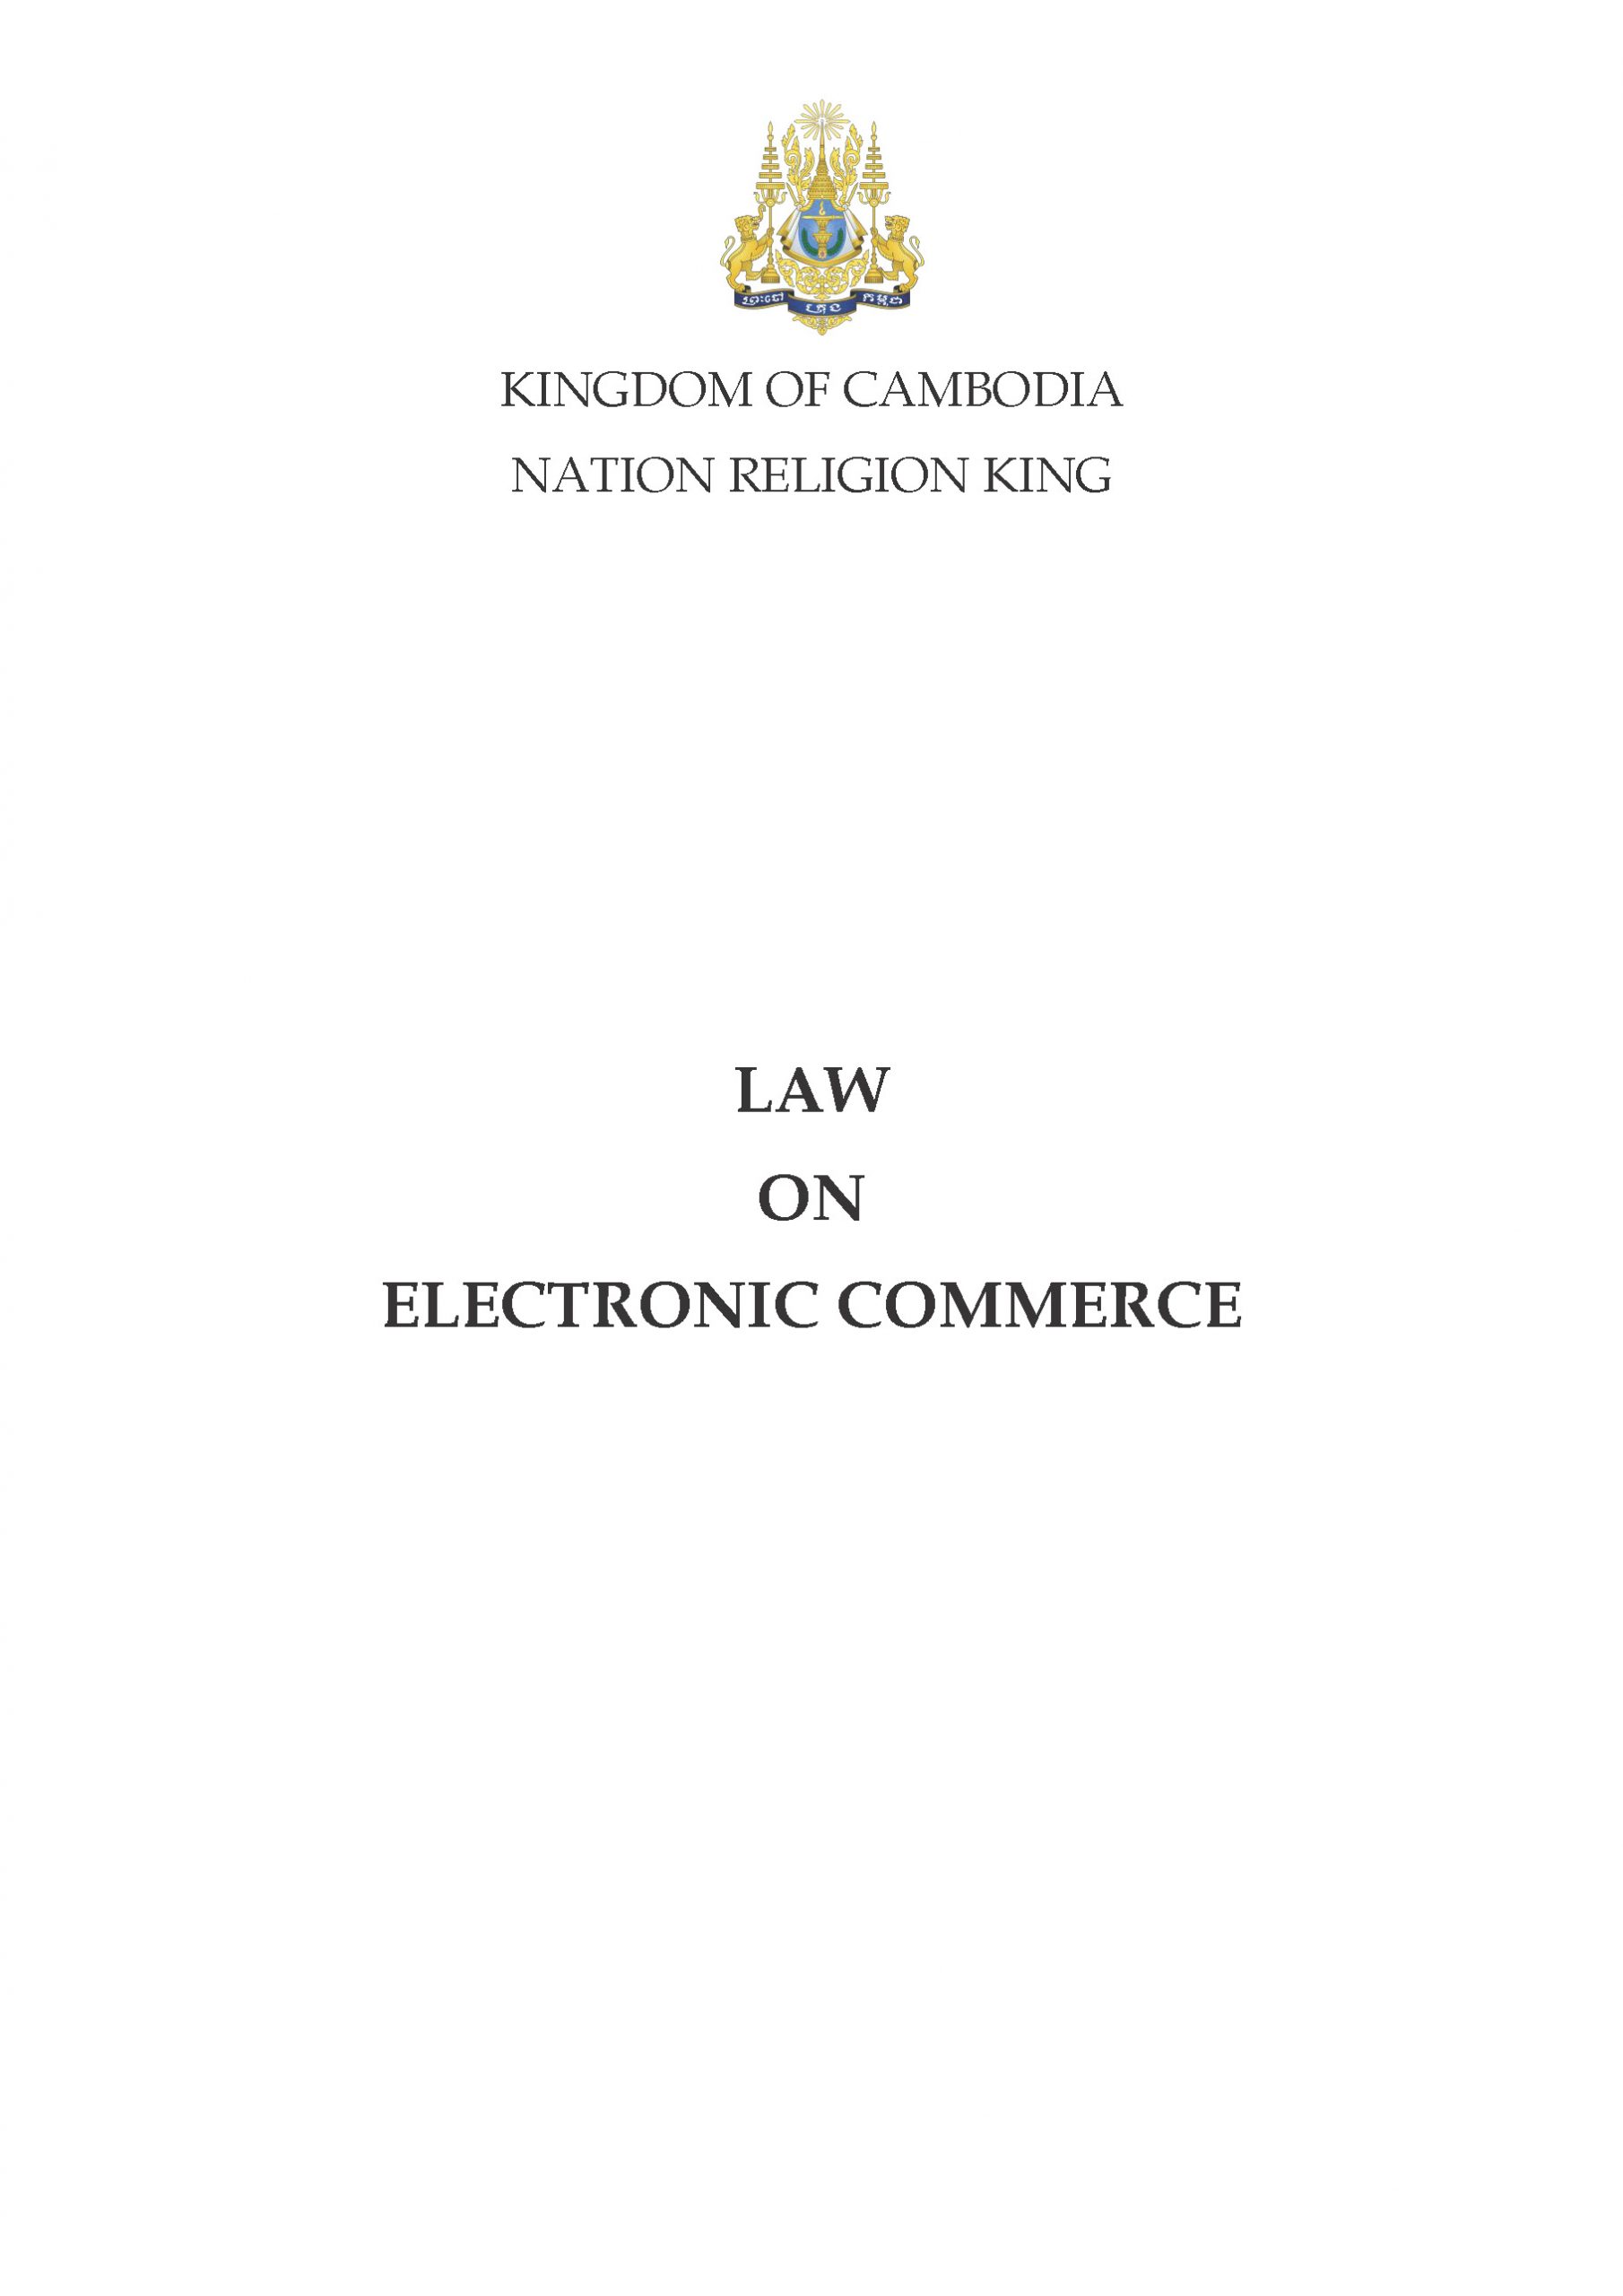 LAW ON ELECTRONIC COMMERCE of Kingdom of Cambodia